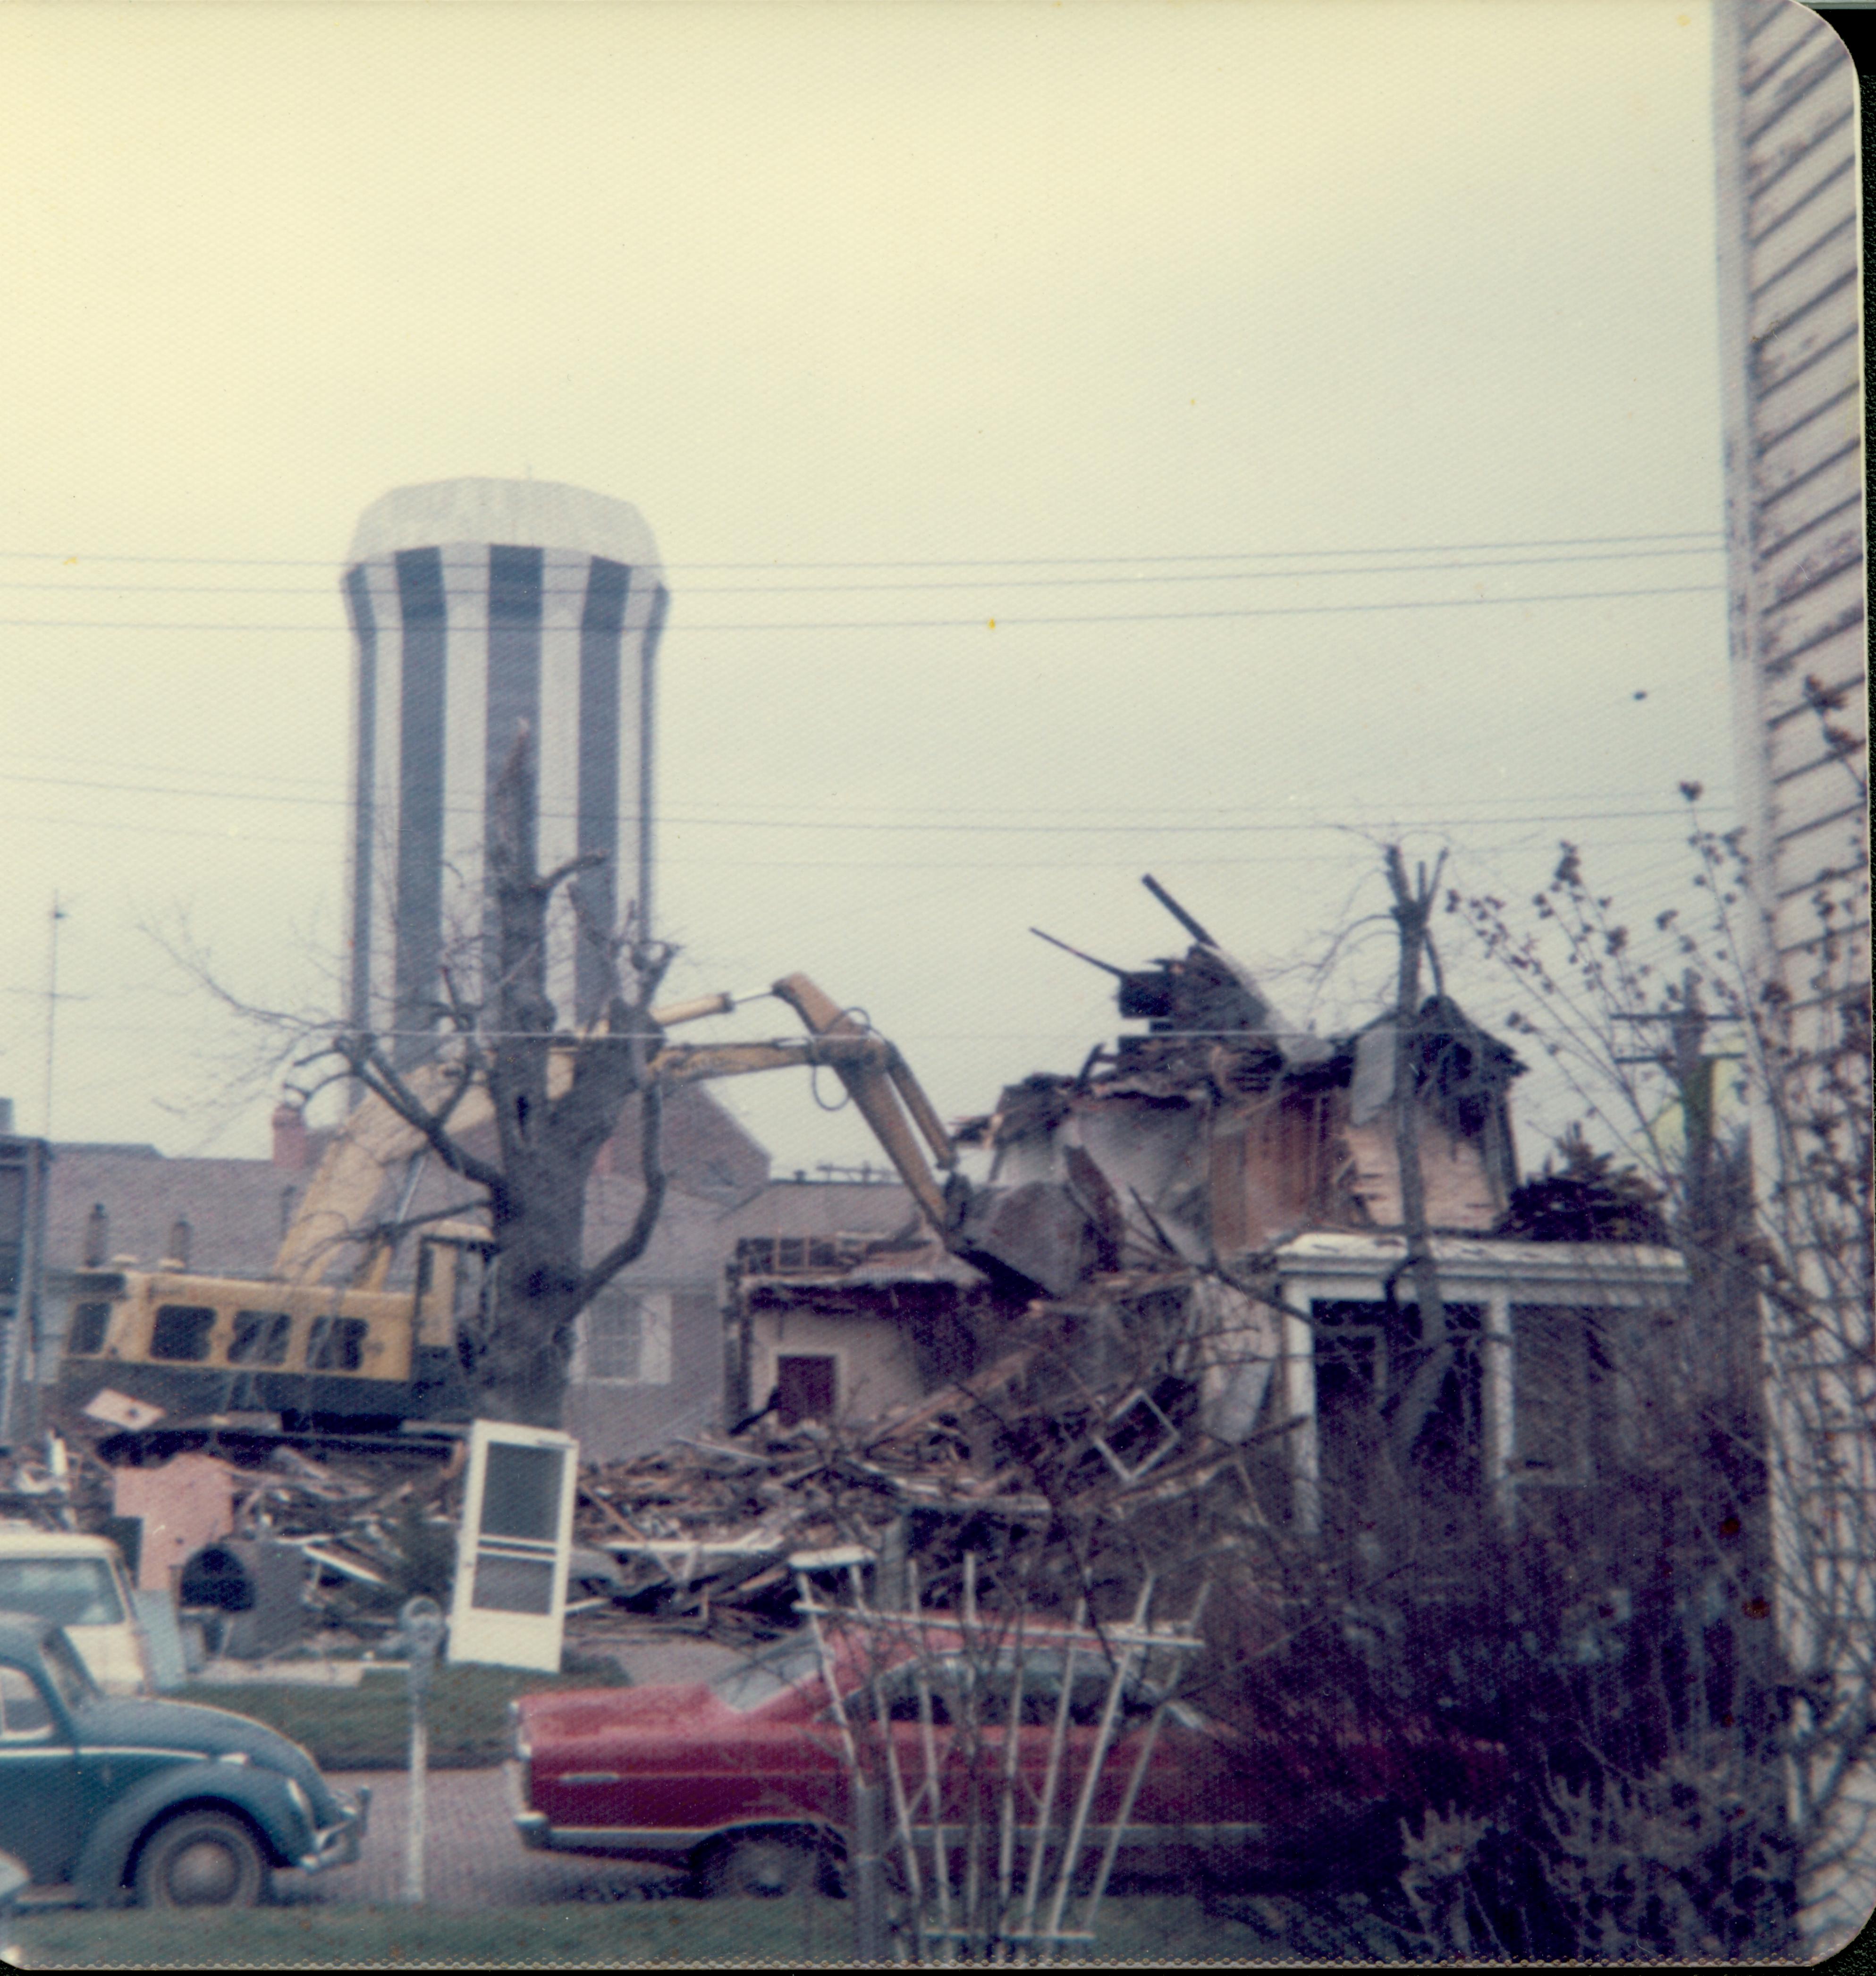 House owned by William Hermes in process of being razed, Block 7, Lot 8 along Jackson Street. Hilton Hotel tower in background center.  House owned by Helen Watkins on far right across the street.  Area is now Visitor Center  Looking North from South of Jackson Street. Hermes, Watkins, Hilton Hotel, Jackson Street, Visitor Center